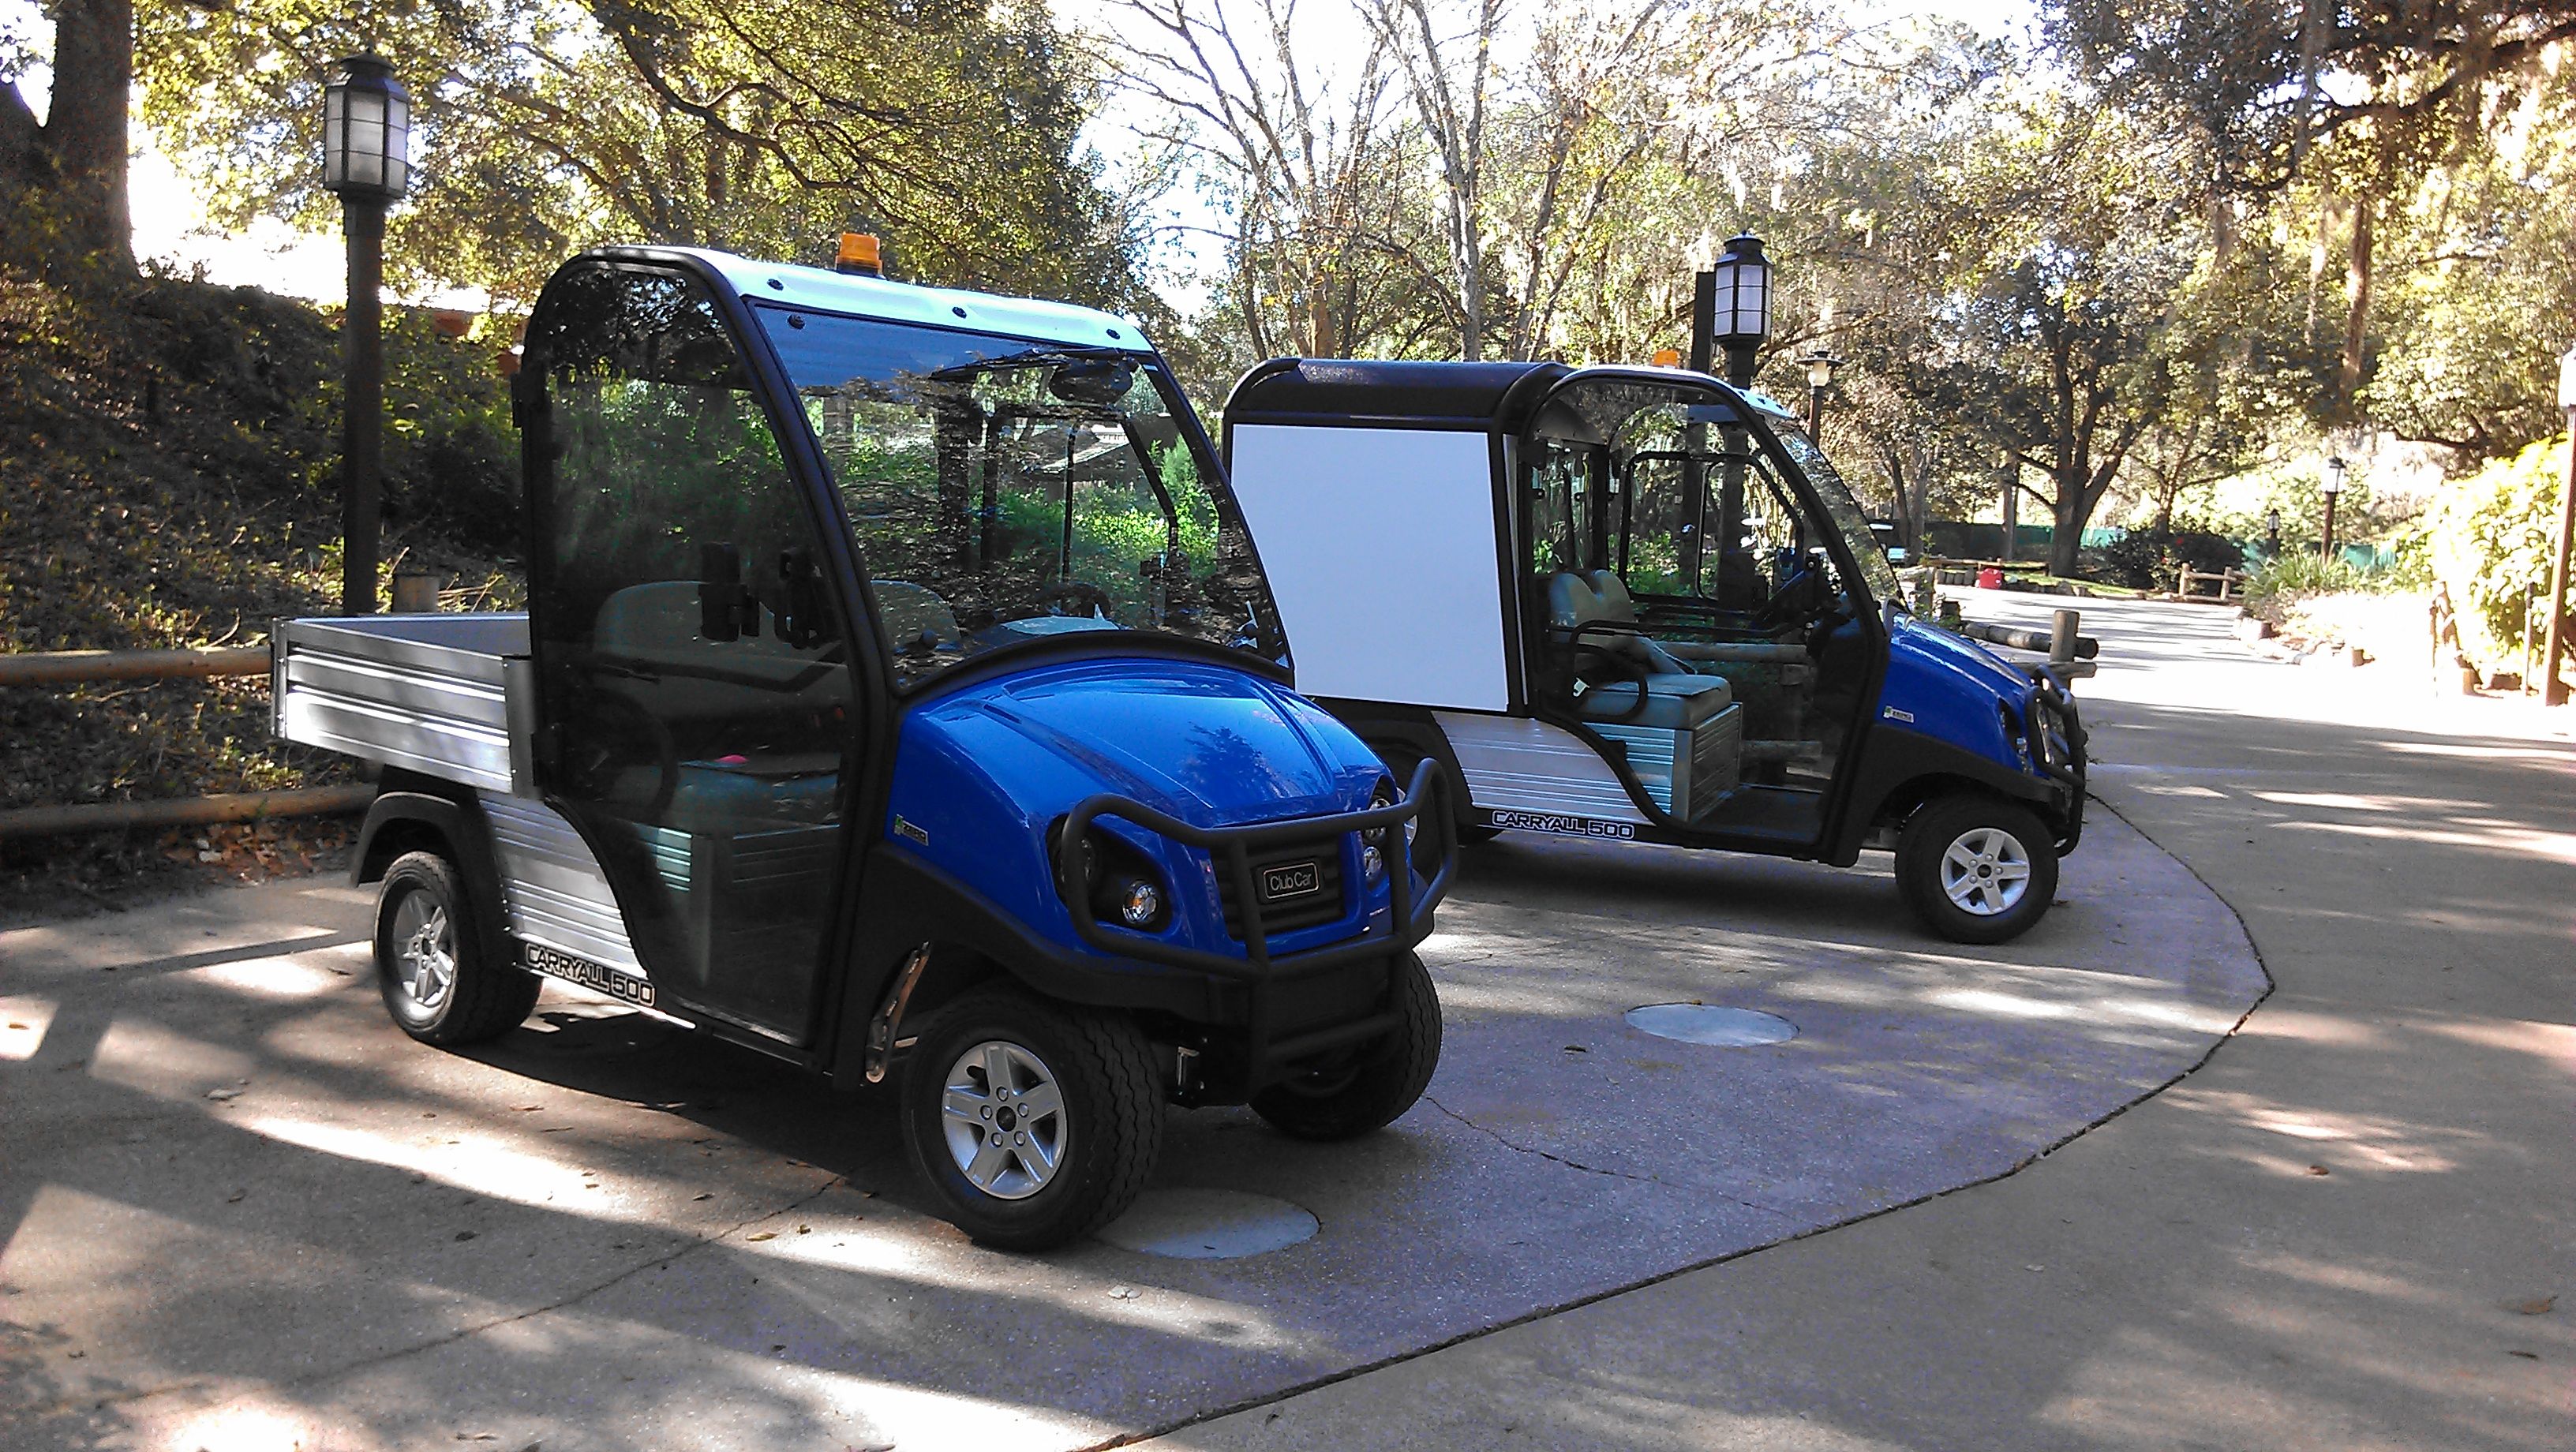 The new Carryall Utility Vehicles accommodate a new  integrated cab that keeps water and wind out and does not look "bolted on."